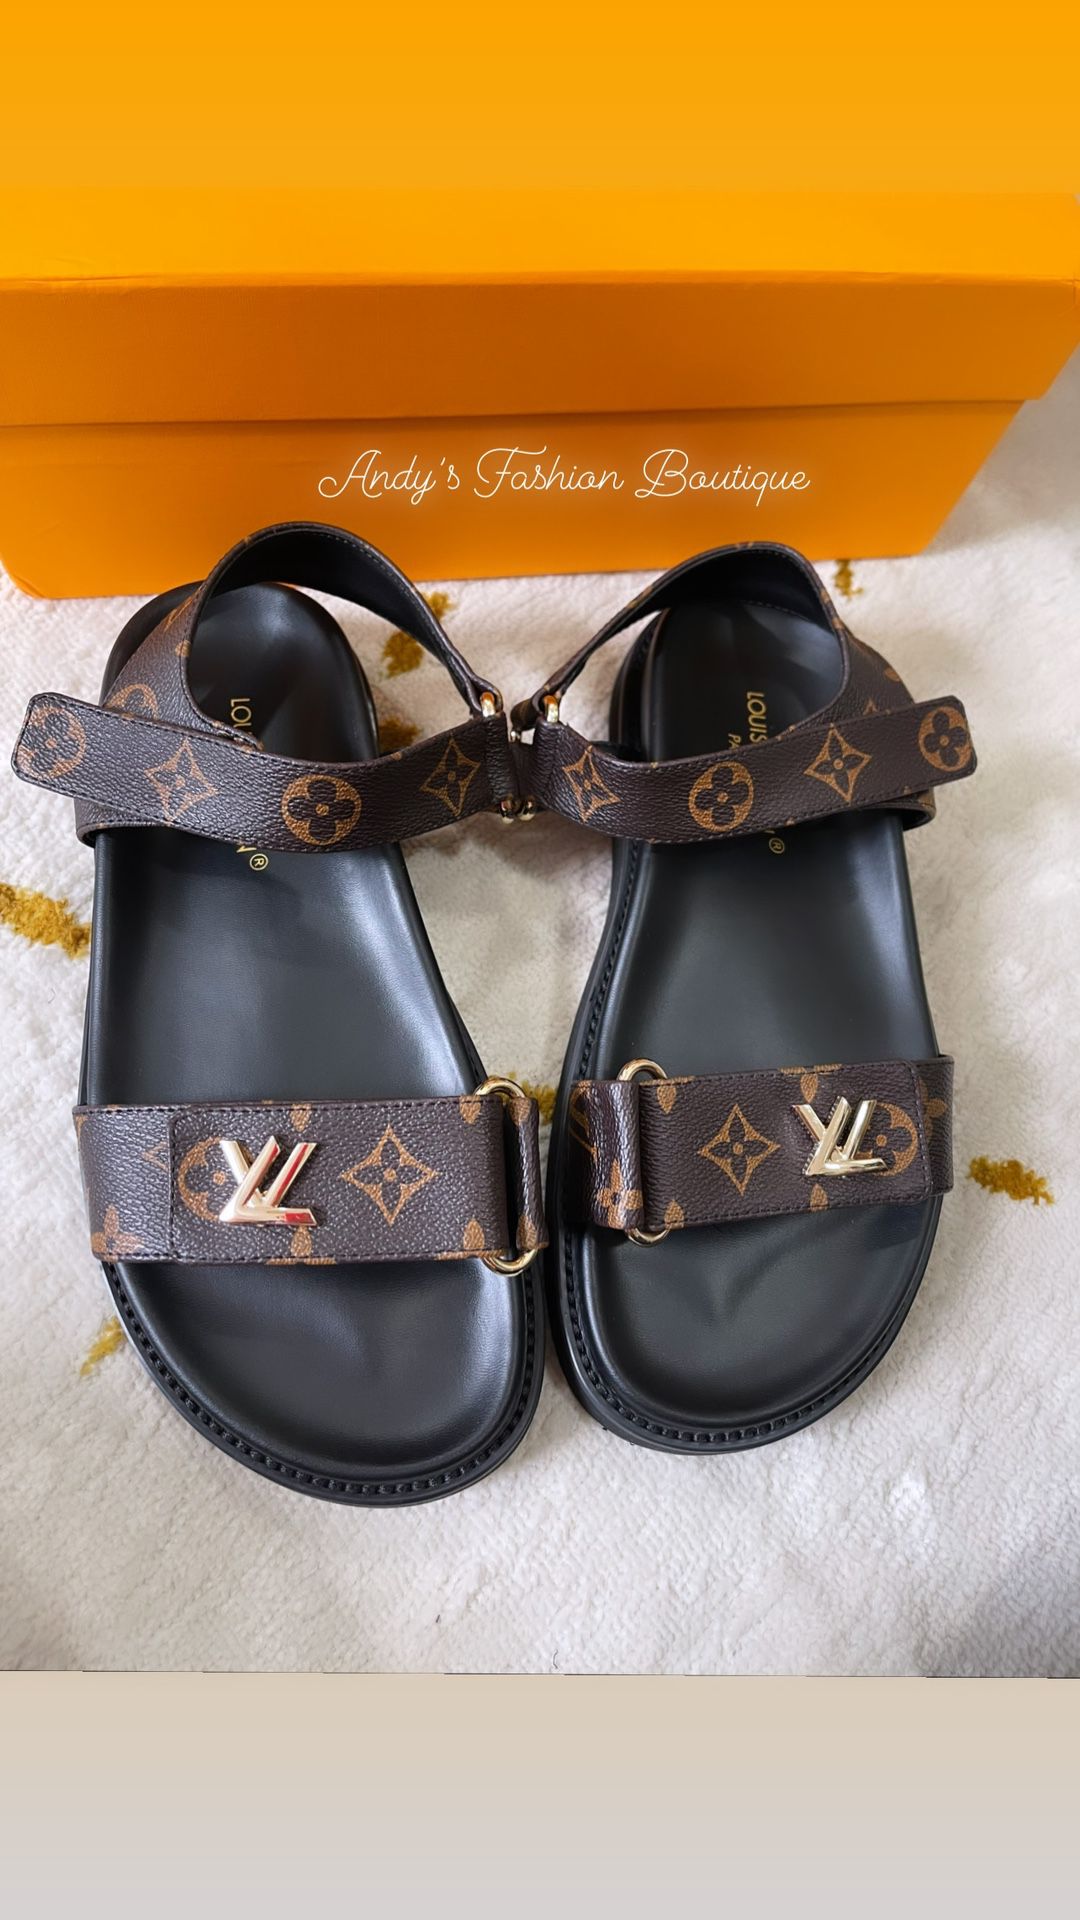 Louis Vuitton Slides for Sale in Brooklyn, NY - OfferUp #louis #vuitton  #sandals #for #sale #lo…